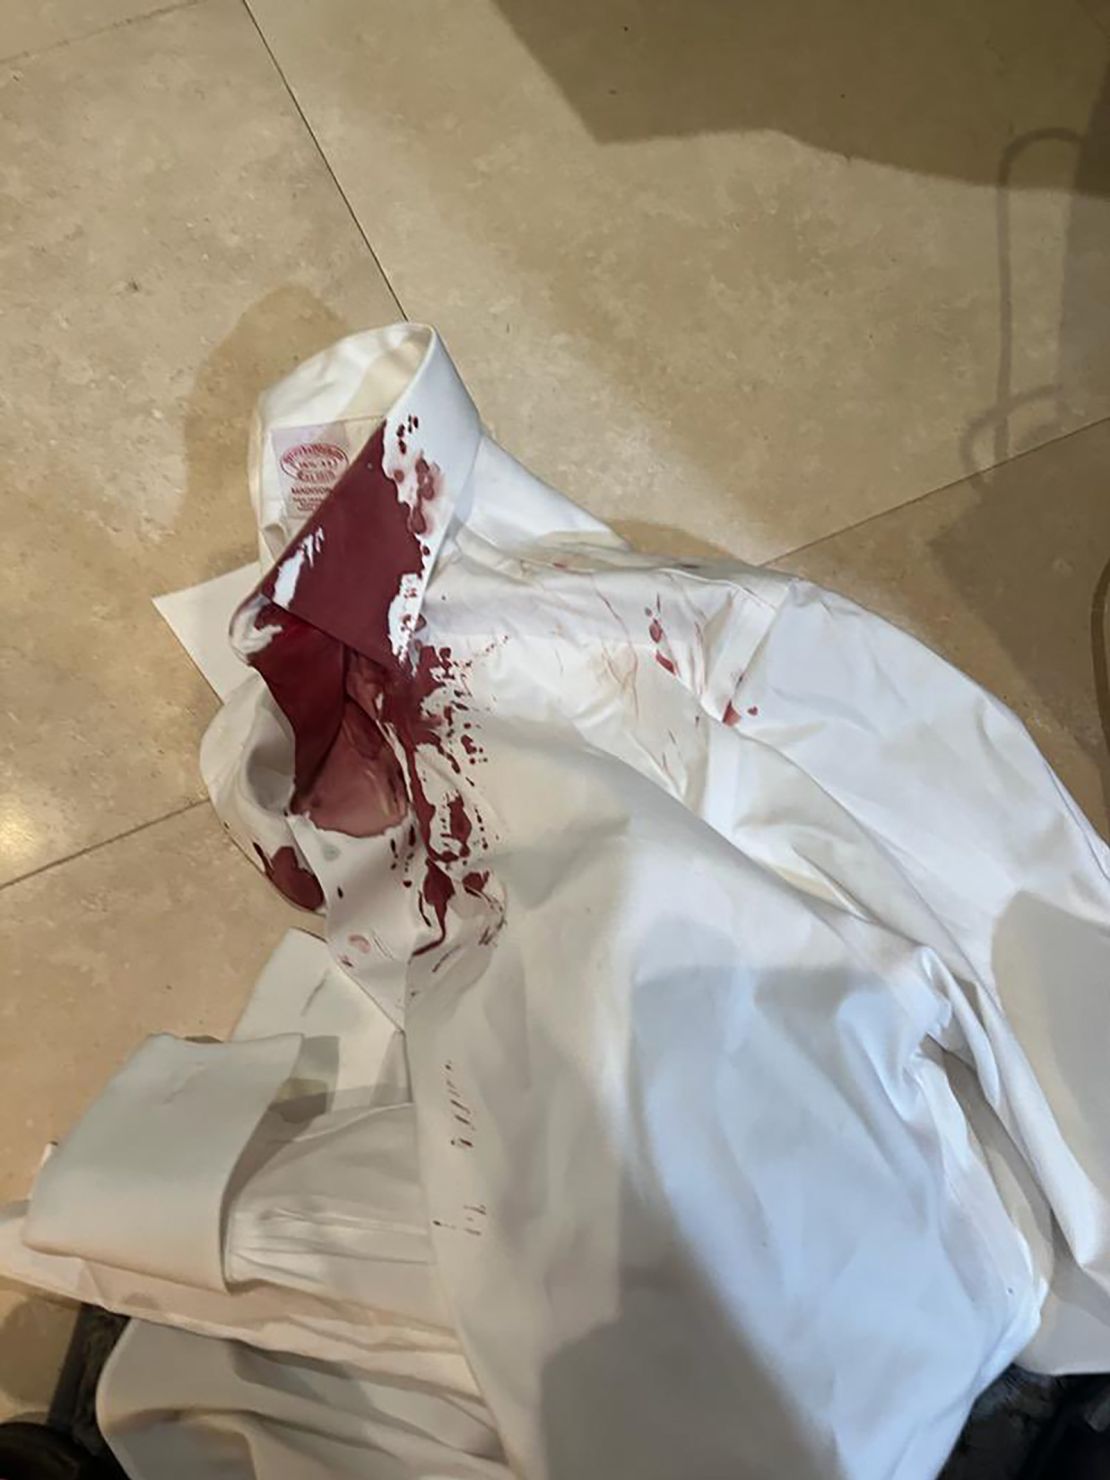 A photo shows the bloody shirt of a man who was attacked in what authorities believe is an antisemitic hate crime. 75-year-old victim, Raphal "Raphy" Nissel, told CNN he and his wife were walking to their synagogue Saturday morning when a man came up behind him and hit him in the head with an object. His wife, Rebecca Nissel, recalled the man saying, "Give me your earrings, Jew."